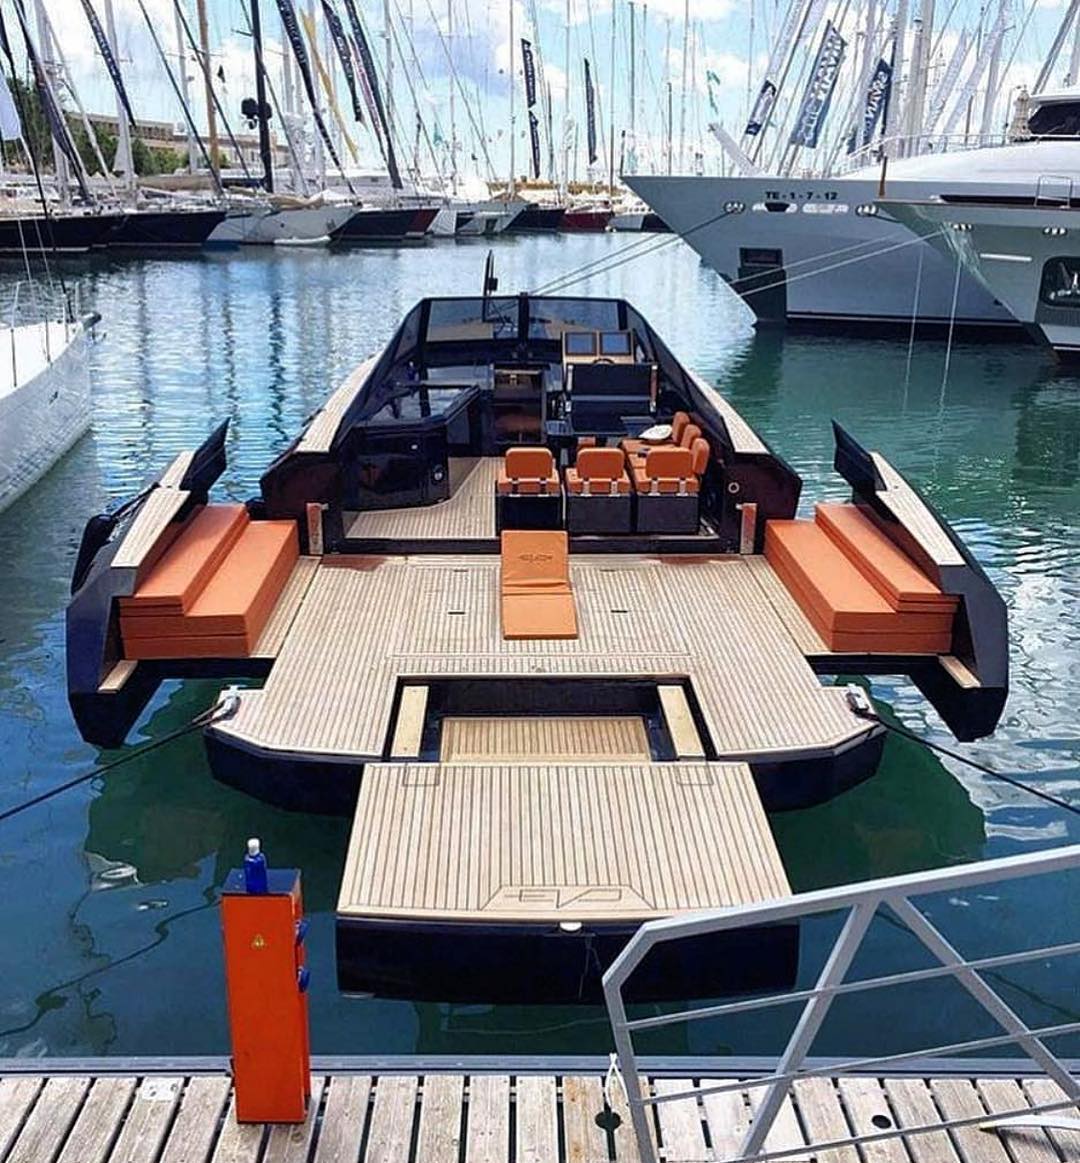 so, it's a crusier with slides....almost like a RV. 
#boating #boatropes #boatlighting #lakes 
@DowryCreek_ @buyanyboat @VentnorMarine 
boat-rope.com